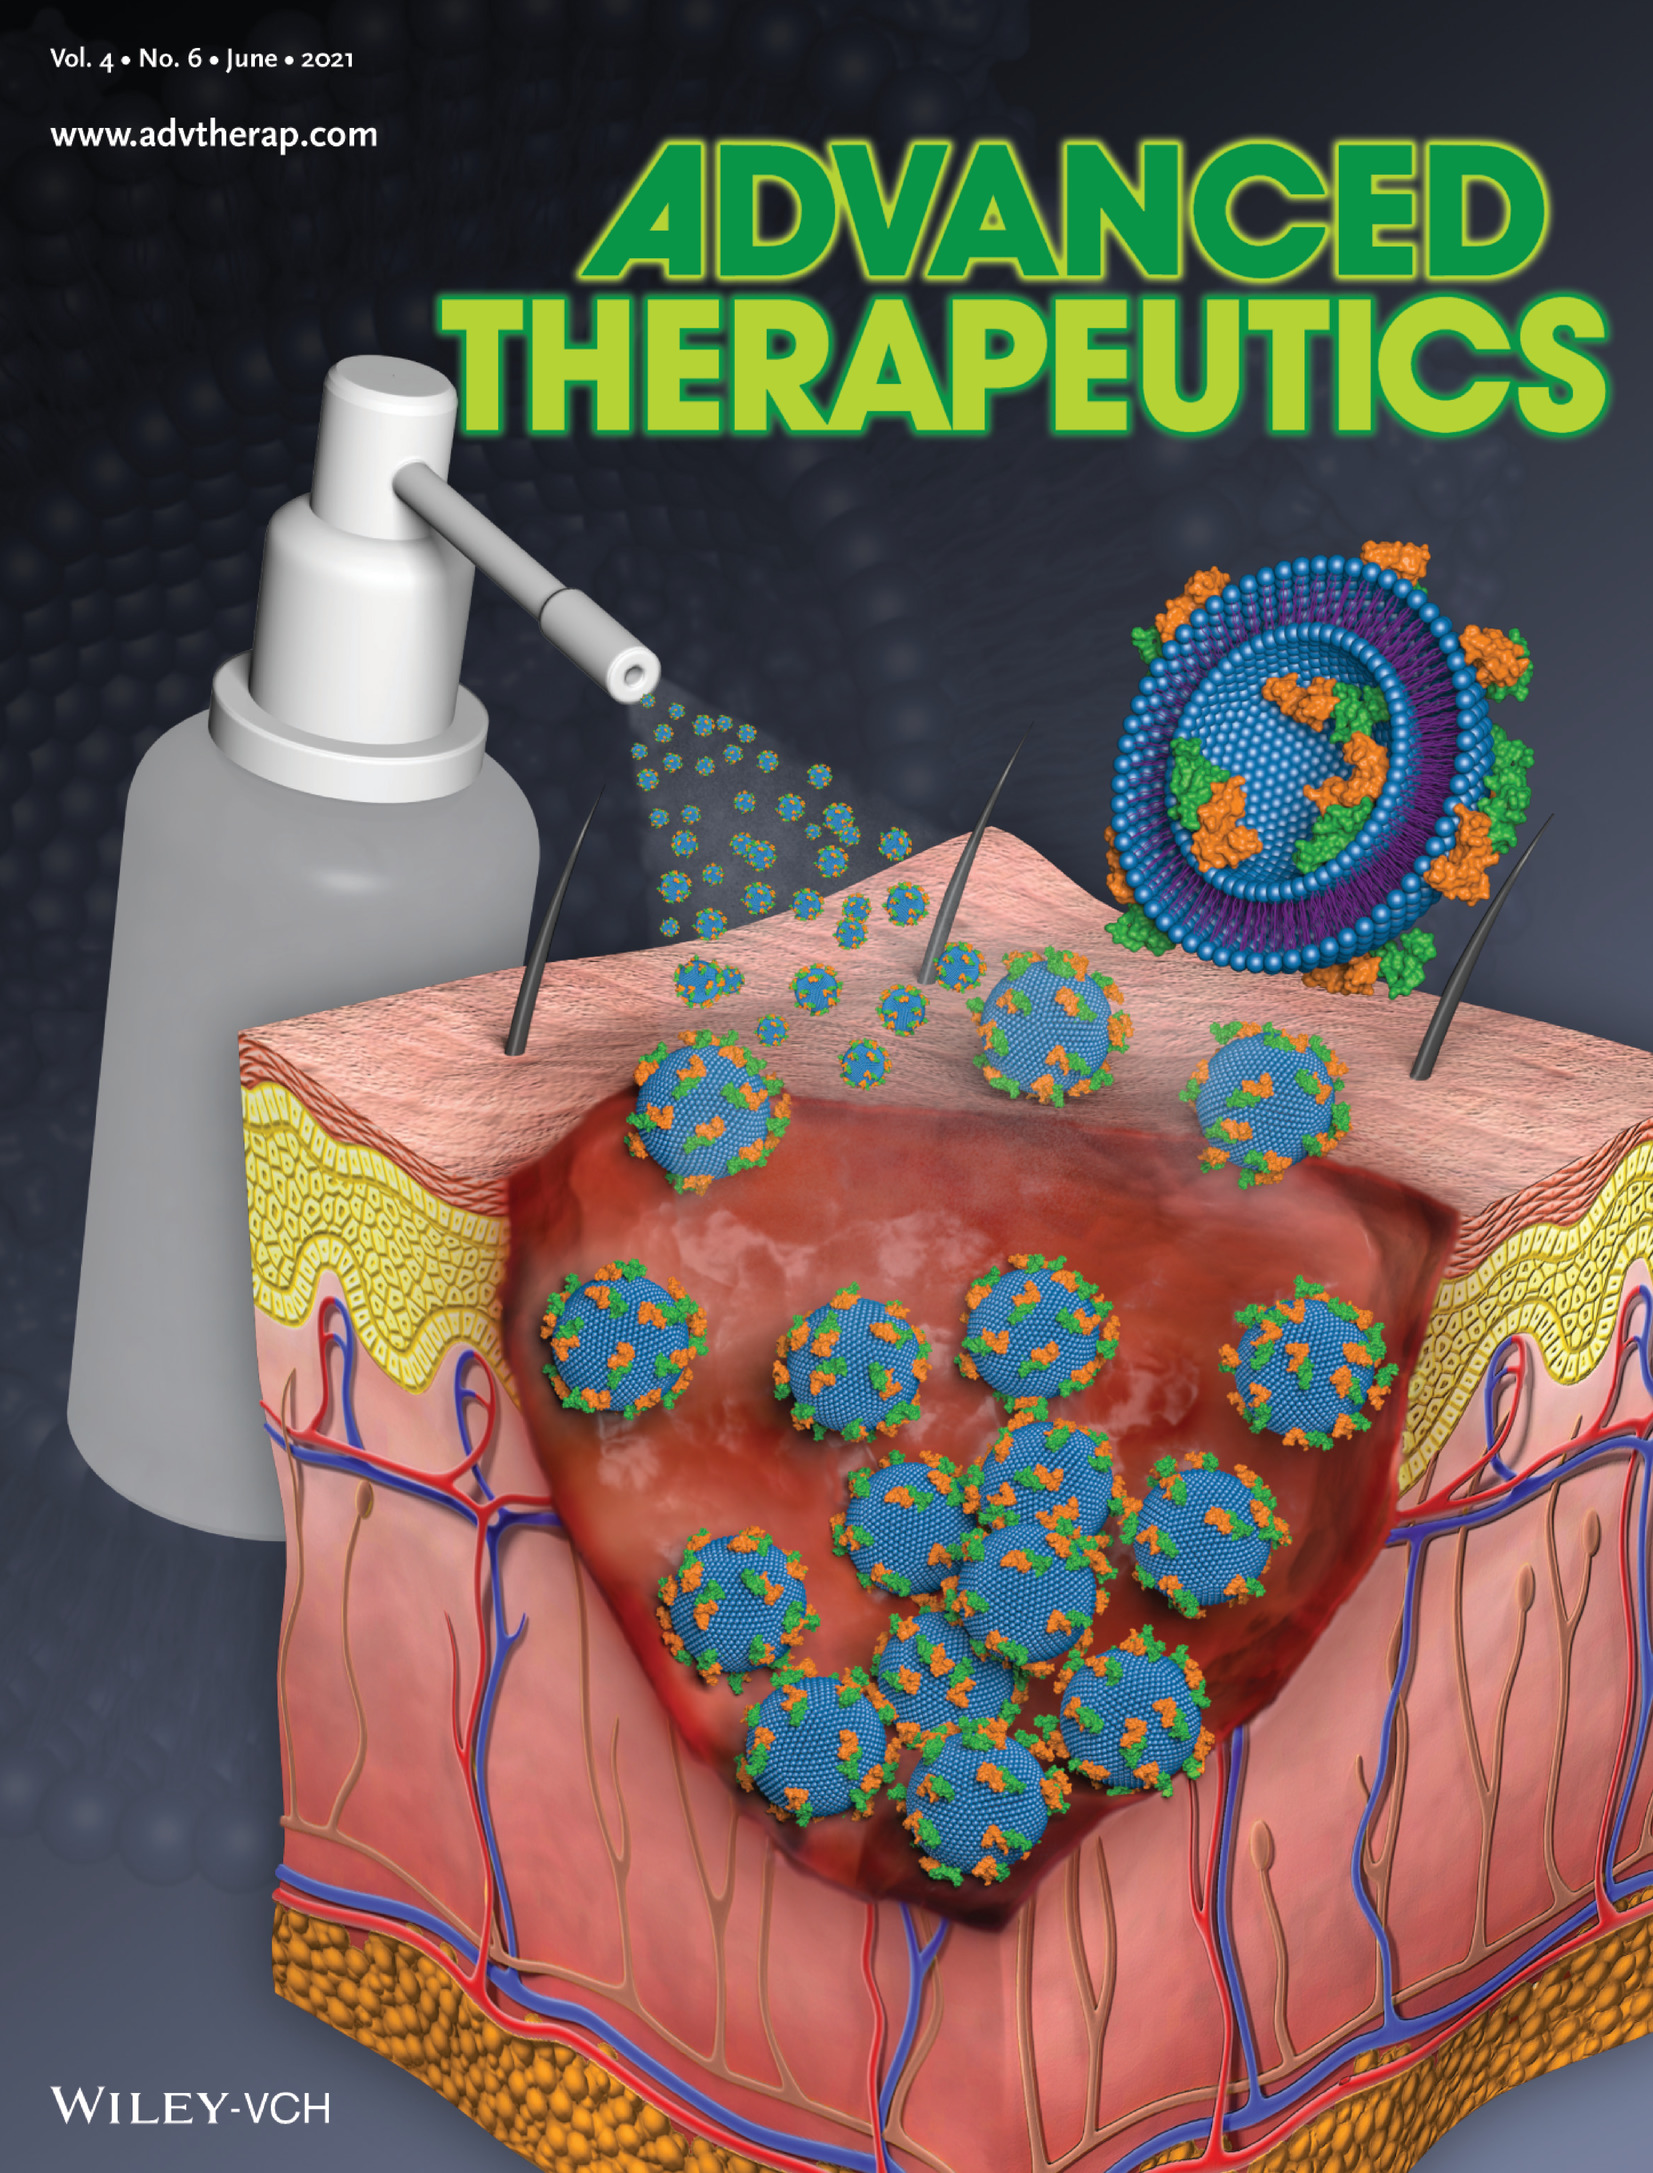 Our paper has been selected for the cover image of the June 2021 issue of Advanced Therapeutics!